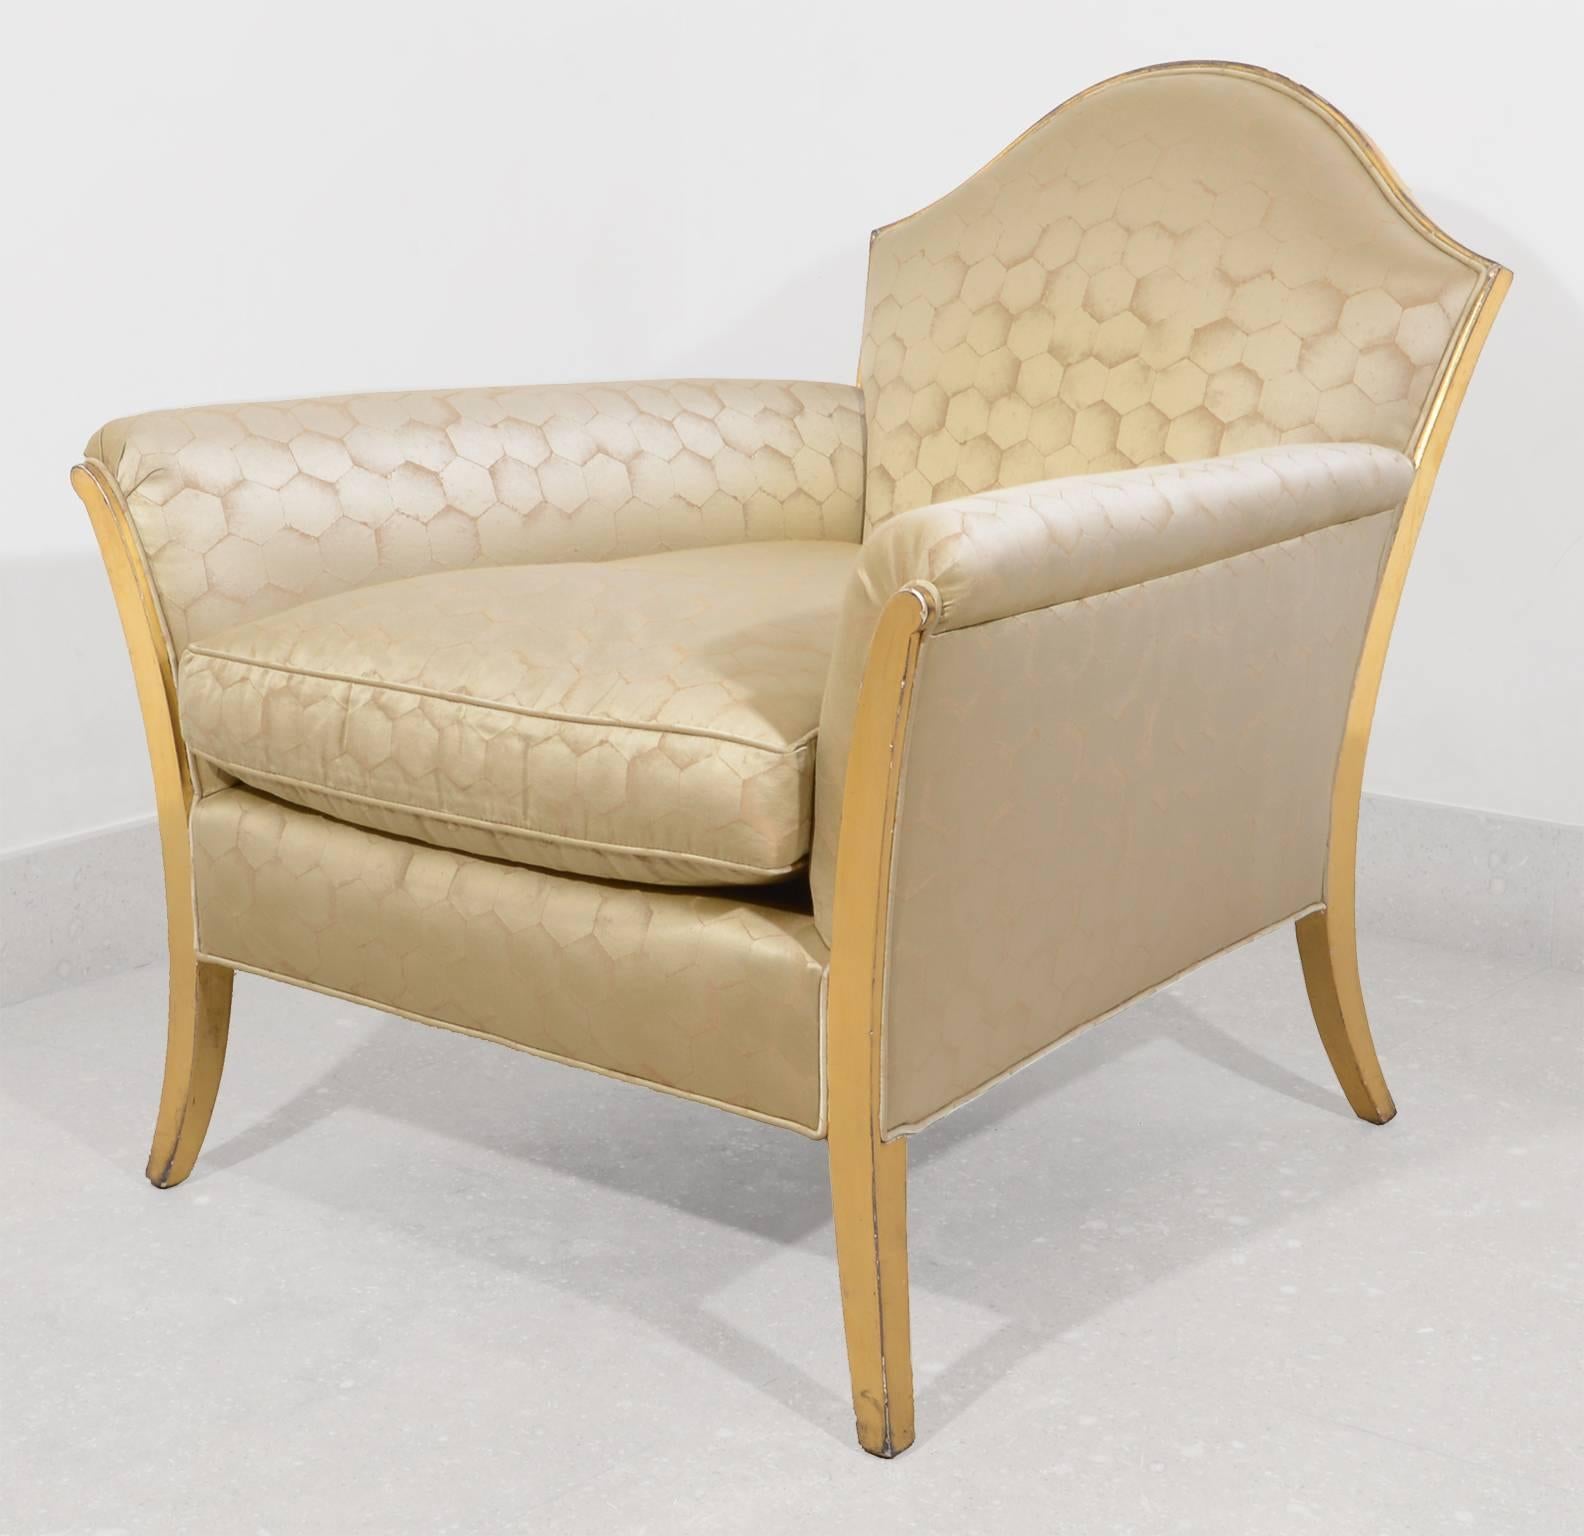 Two lounge chairs and one ottoman. One chair is upholstered in gold fabric as shown in images and other lounge chair and ottoman need to be reupholstered.